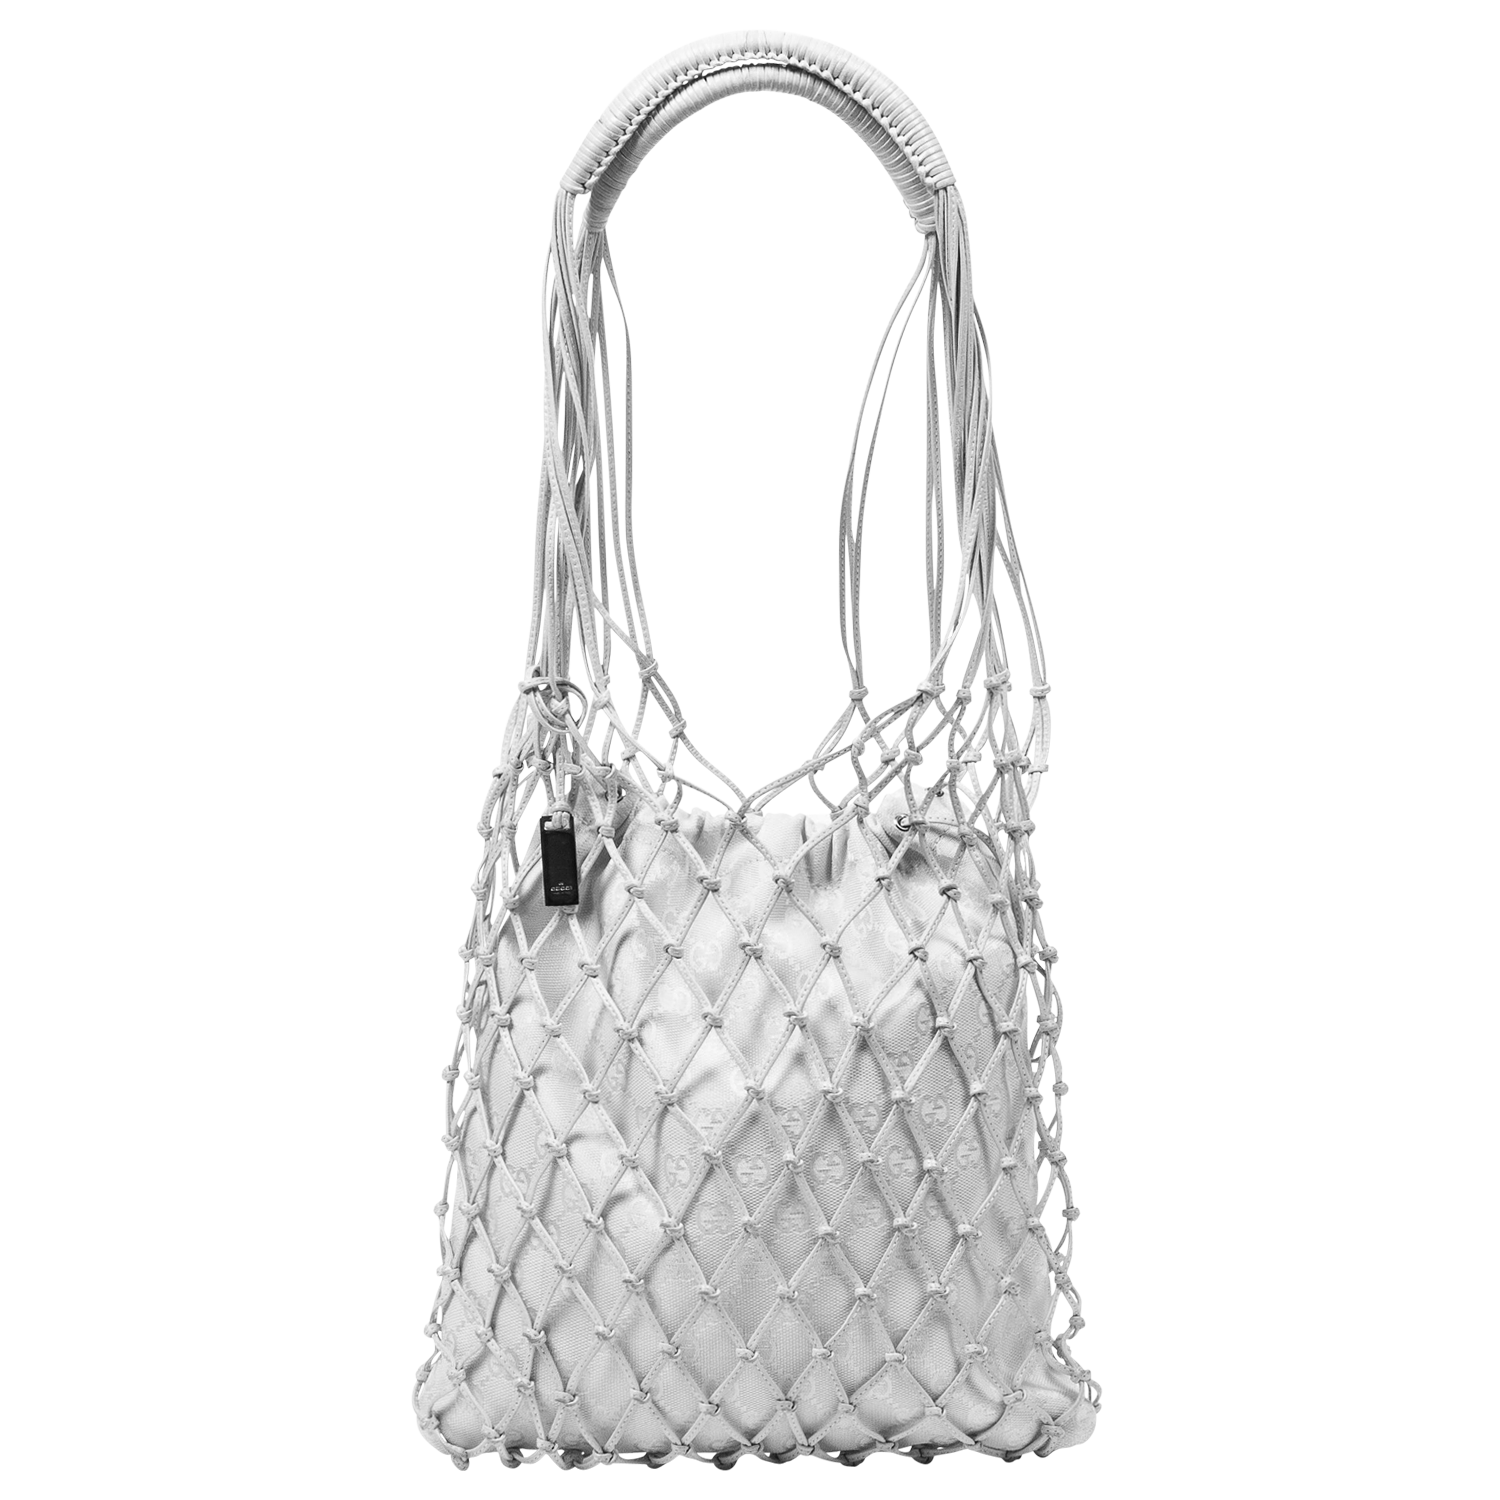 Gucci by Tom Ford Leather Net GG Canvas Shoulder Tote